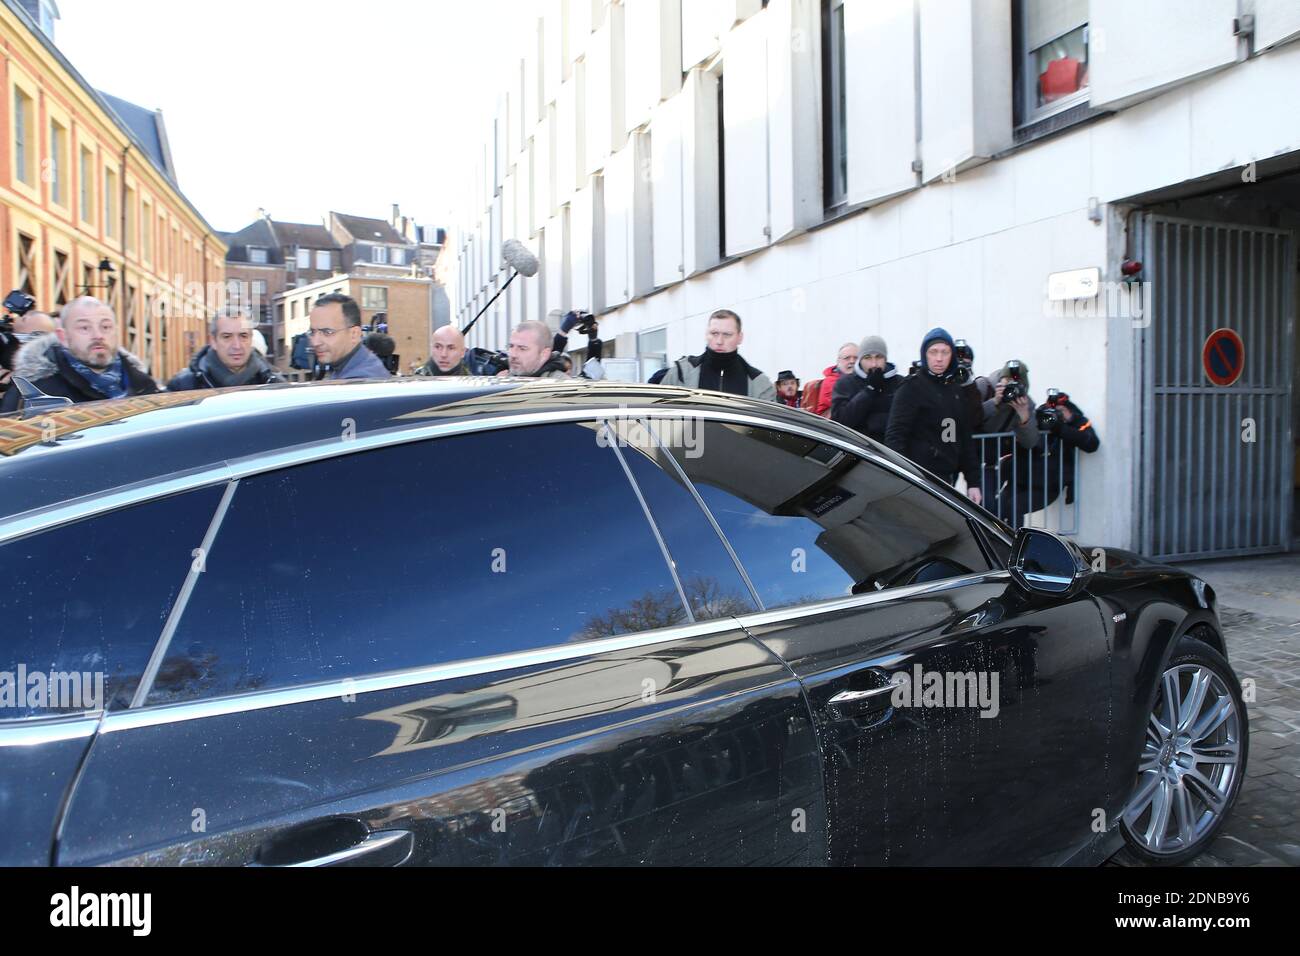 A car carying Dominique Strauss-Kahn arrives at the Lille Criminal Court for the Carlton case trial opening, in Lille, northern France on February 2, 2015. The case is named after a hotel at the centre of an alleged prostitution network with a cast of accused including former IMF managing director Dominique Strauss-Kahn, a police commissioner, the owner of a chain of brothels named Dodo la Saumure, a barrister, two luxury hotel directors and several freemasons. Photo by ABACAPRESS.COM Stock Photo